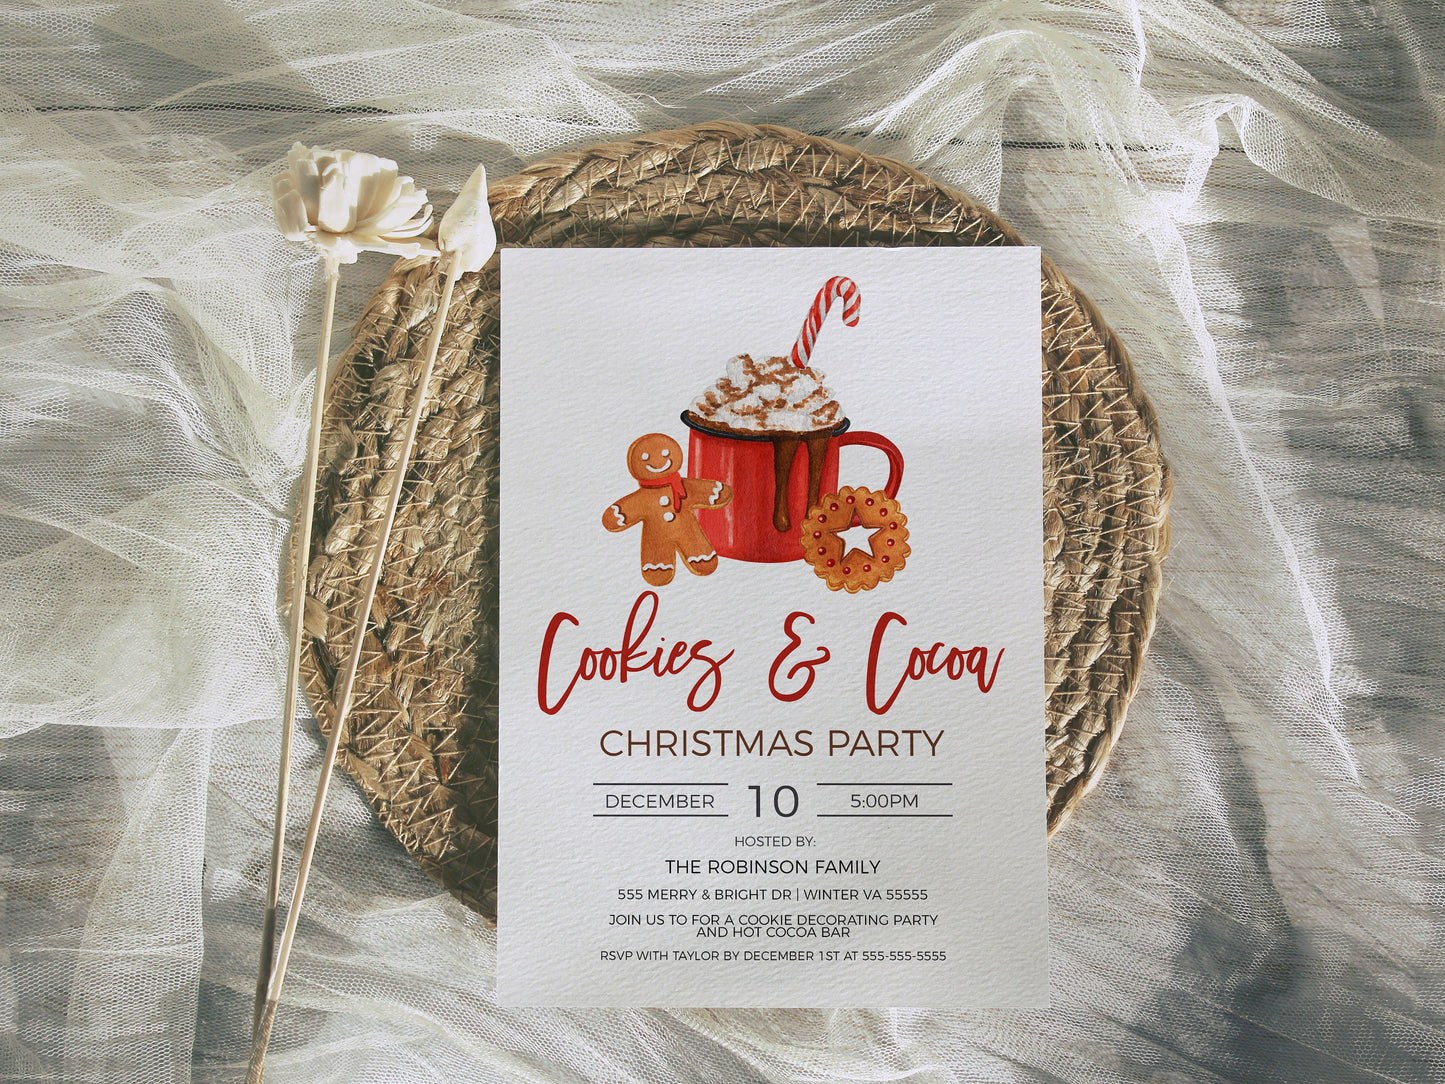 Cookies & Cocoa Party Invitation, Editable Cookie Decorating Party, Hot Chocolate Bar, Holiday Christmas Party, DIY Printable Template